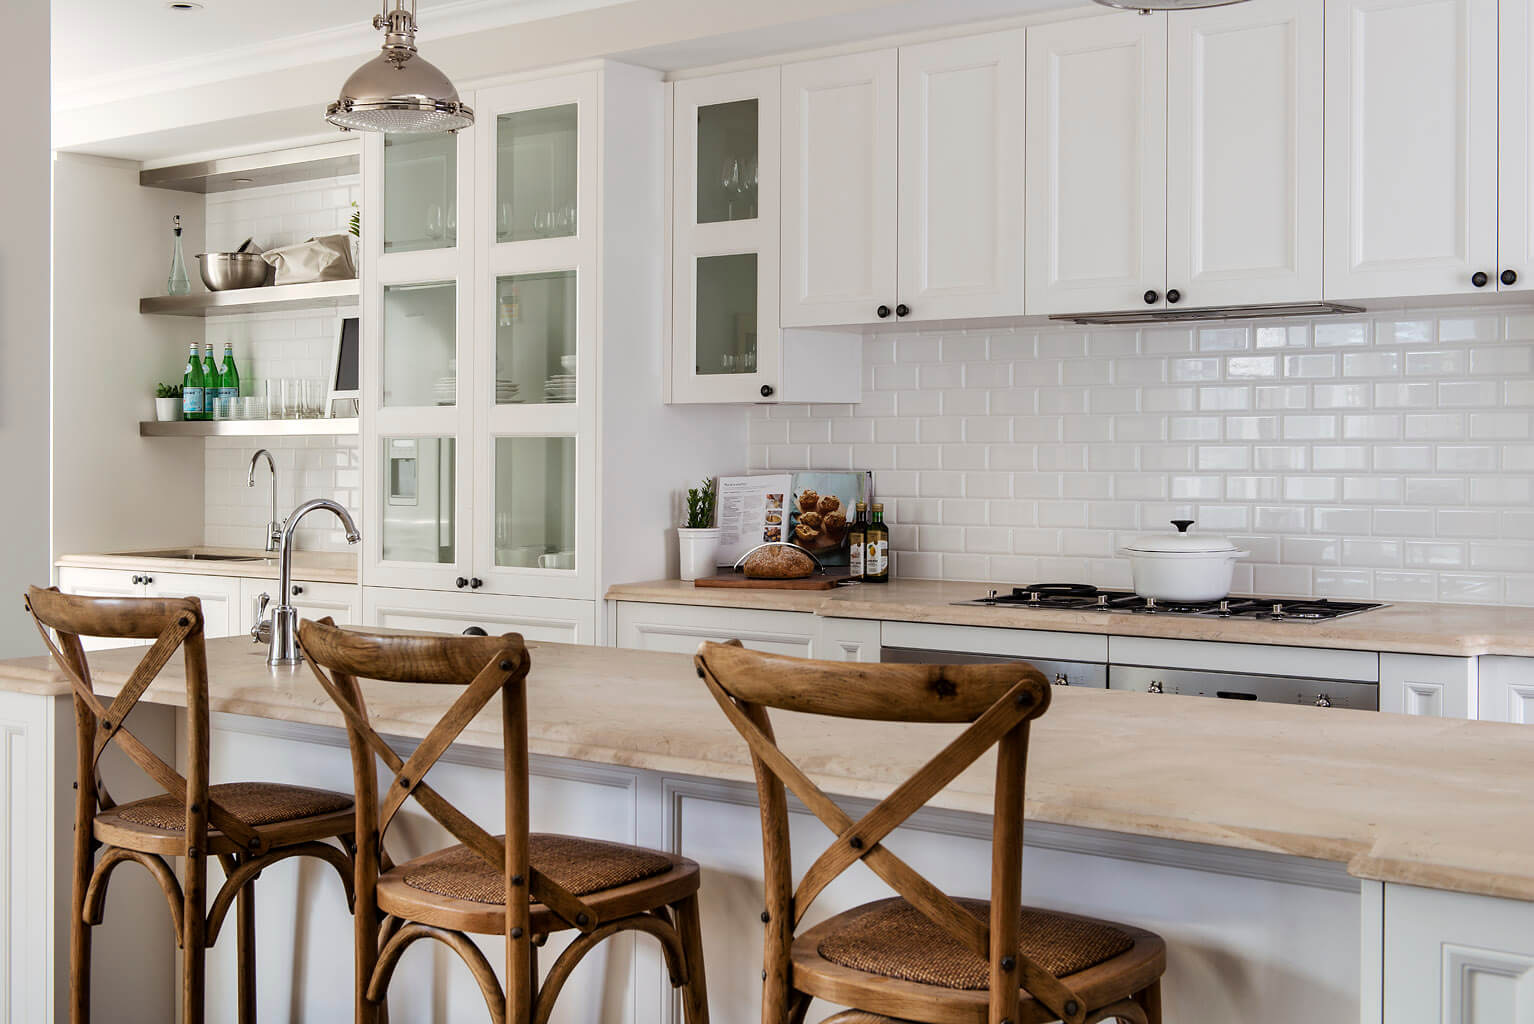 Open Shelving Is Typical Of Modern Country Kitchen Design 